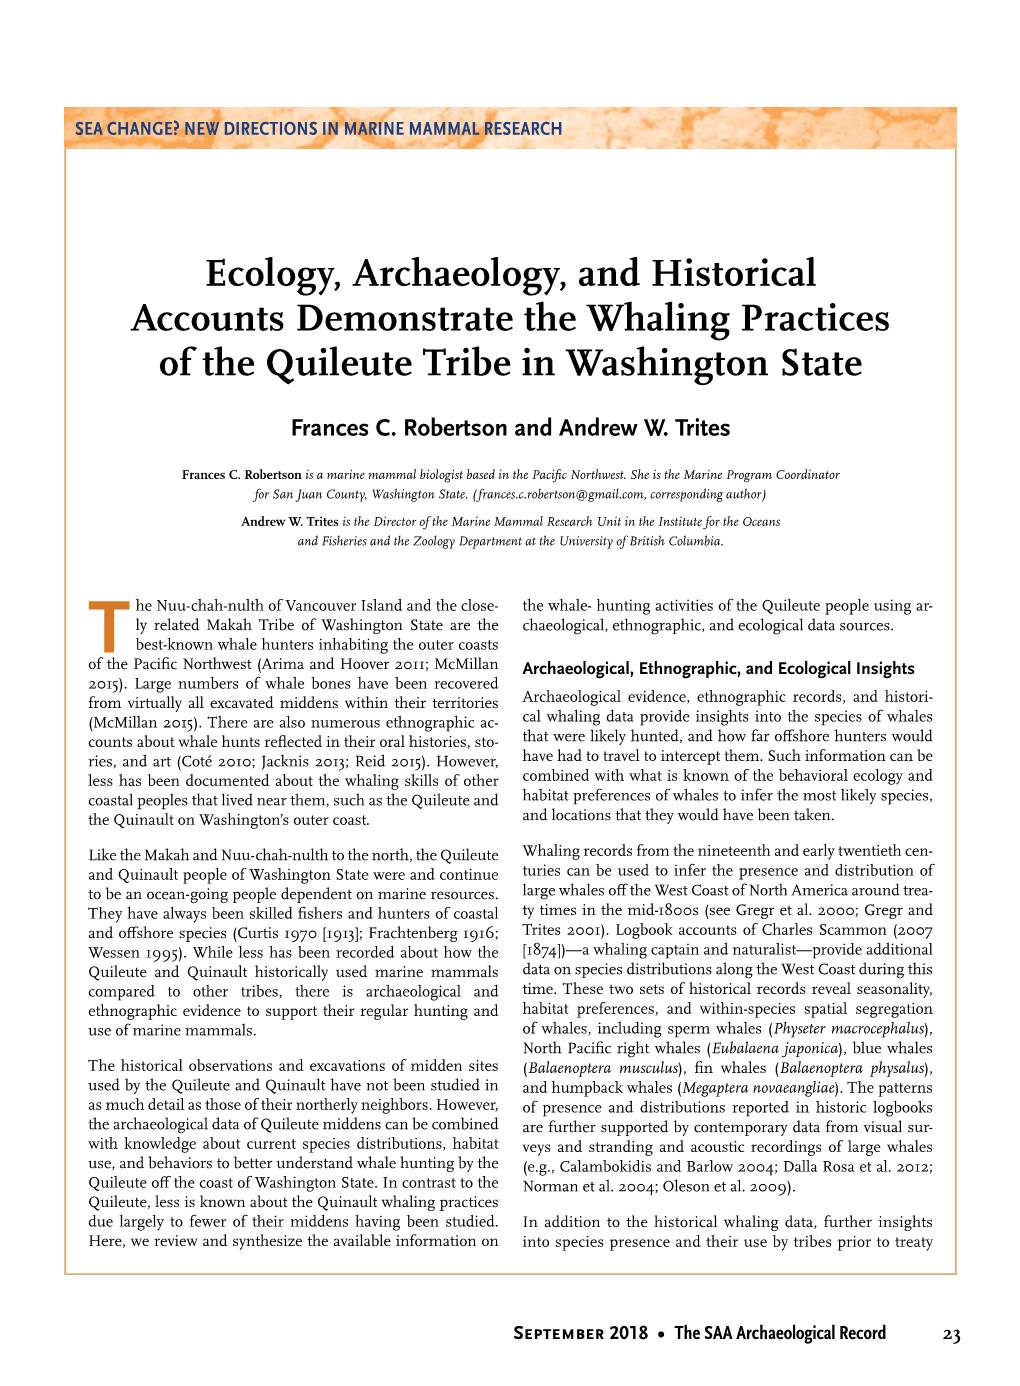 Ecology, Archaeology, and Historical Accounts Demonstrate the Whaling Practices of the Quileute Tribe in Washington State